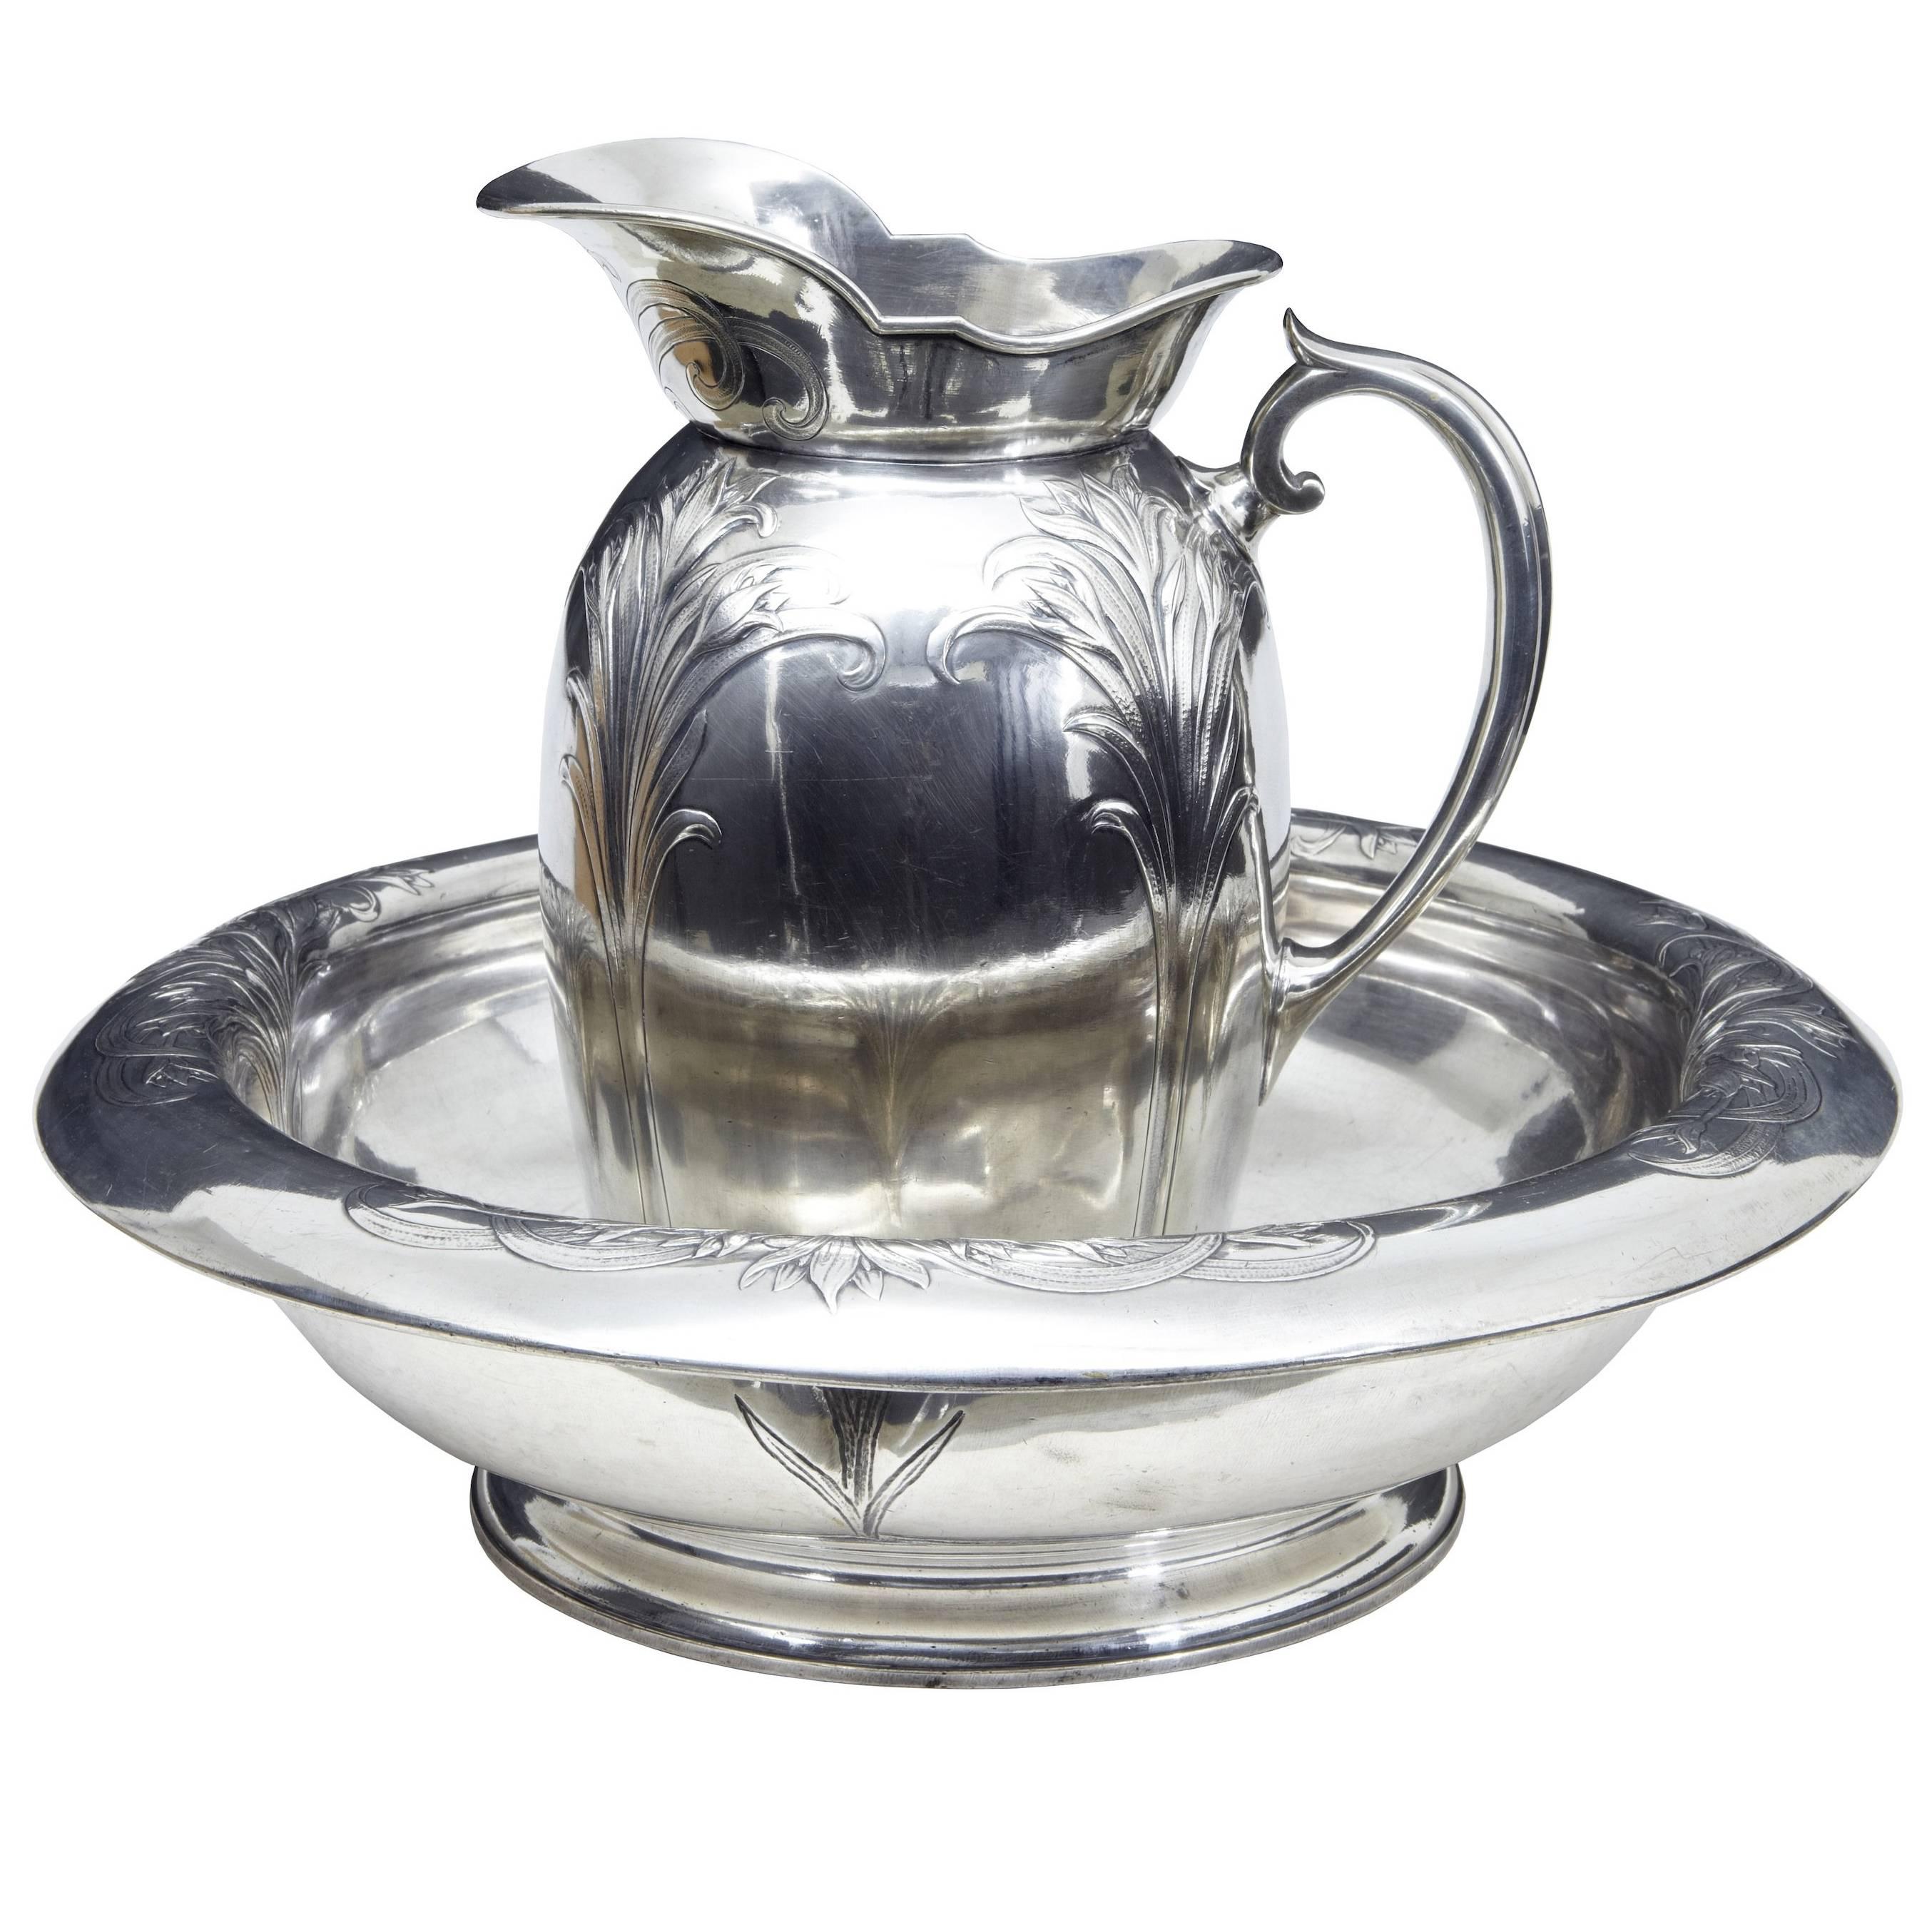 Late 19th Century Art Nouveau Silver Plate Jug and Bowl by Christofle